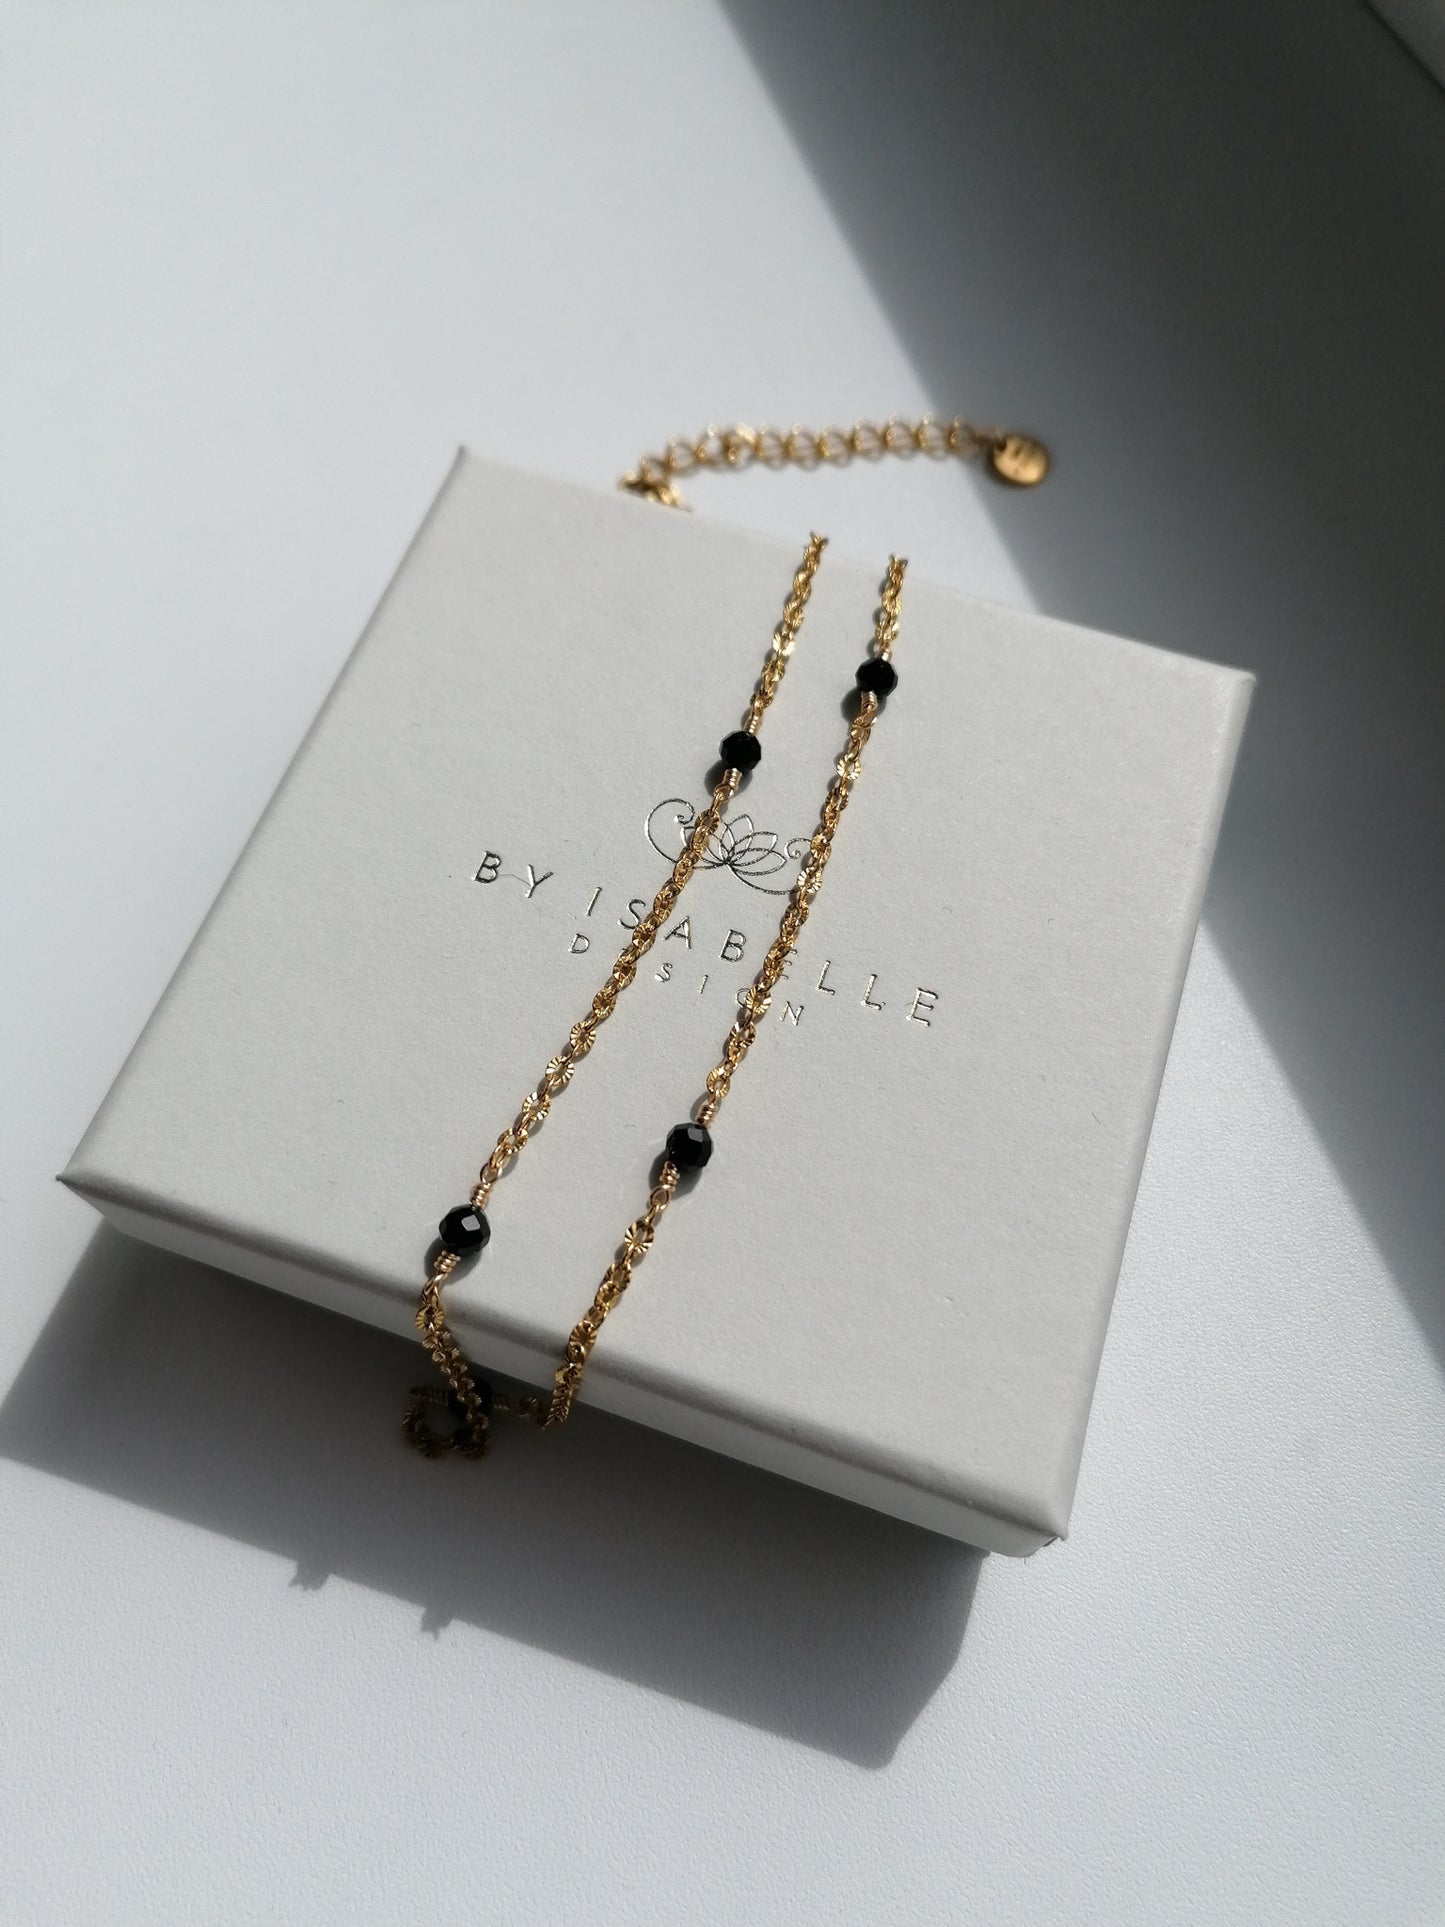 Aria necklace - black spinel